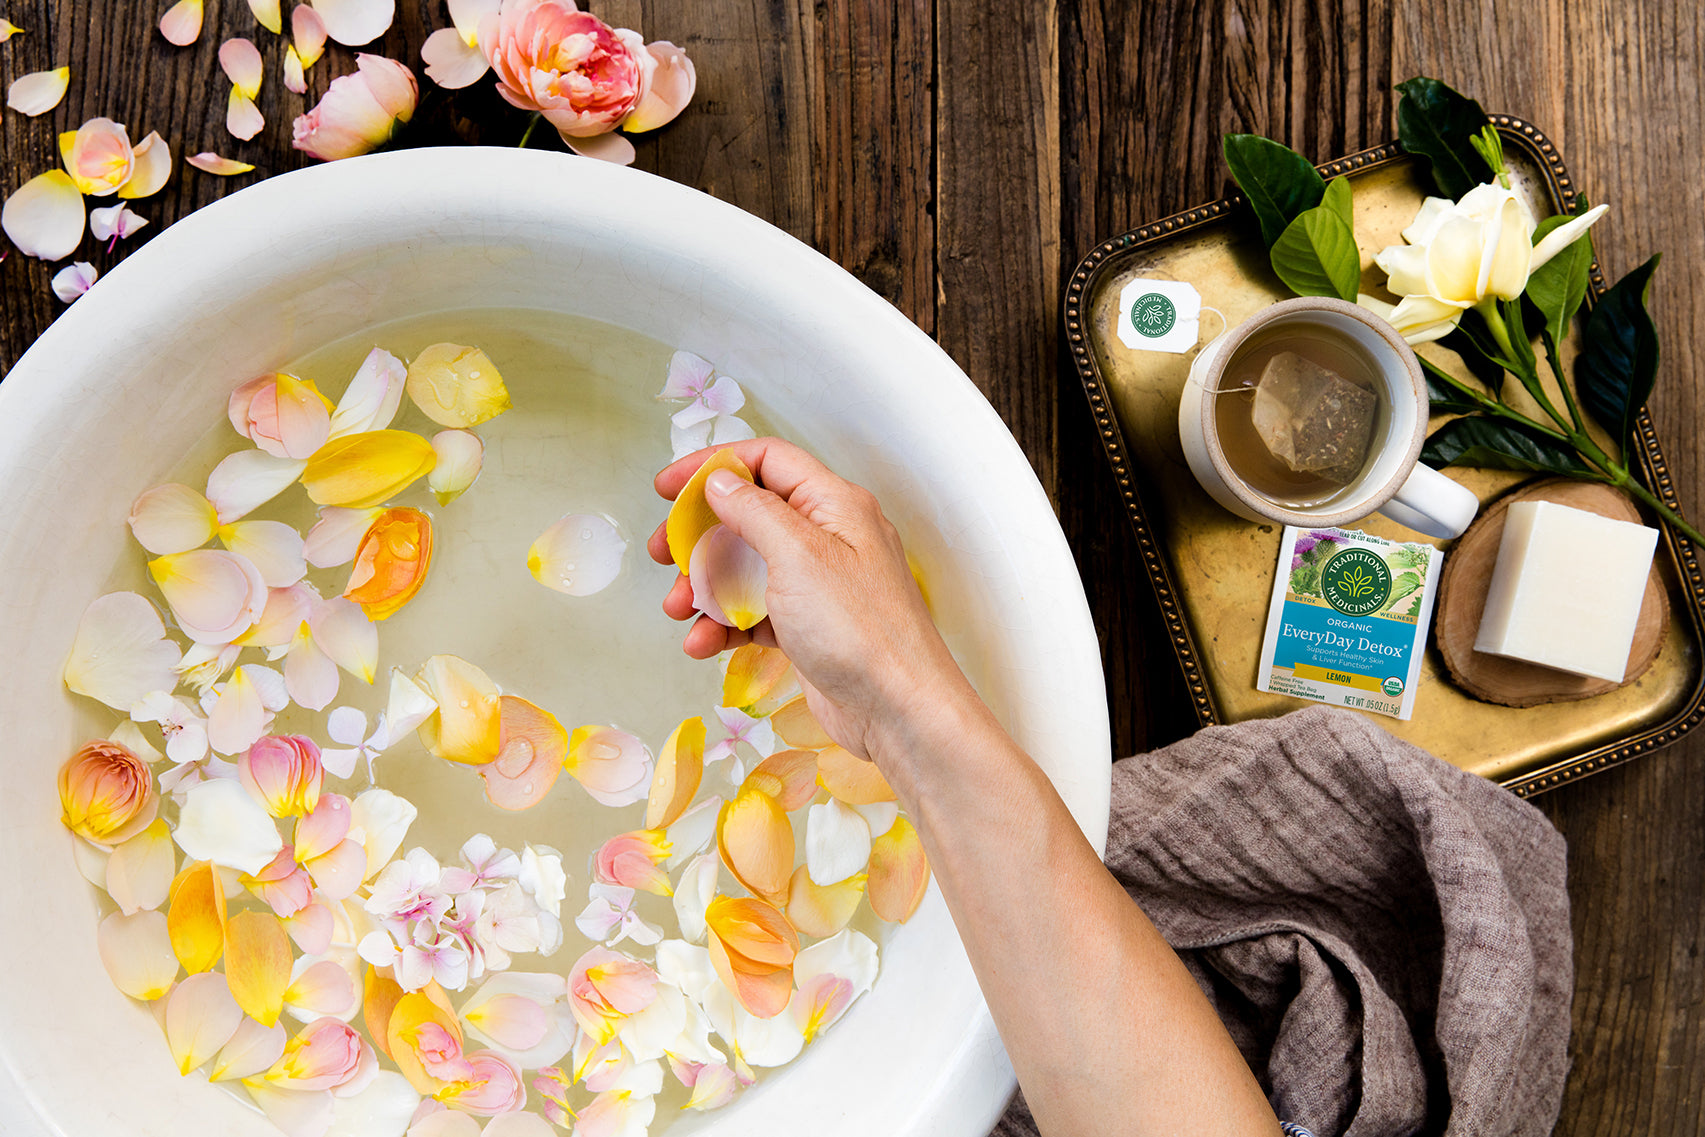 Rose petals floating in large bowl of water with EveryDay Detox tea on table